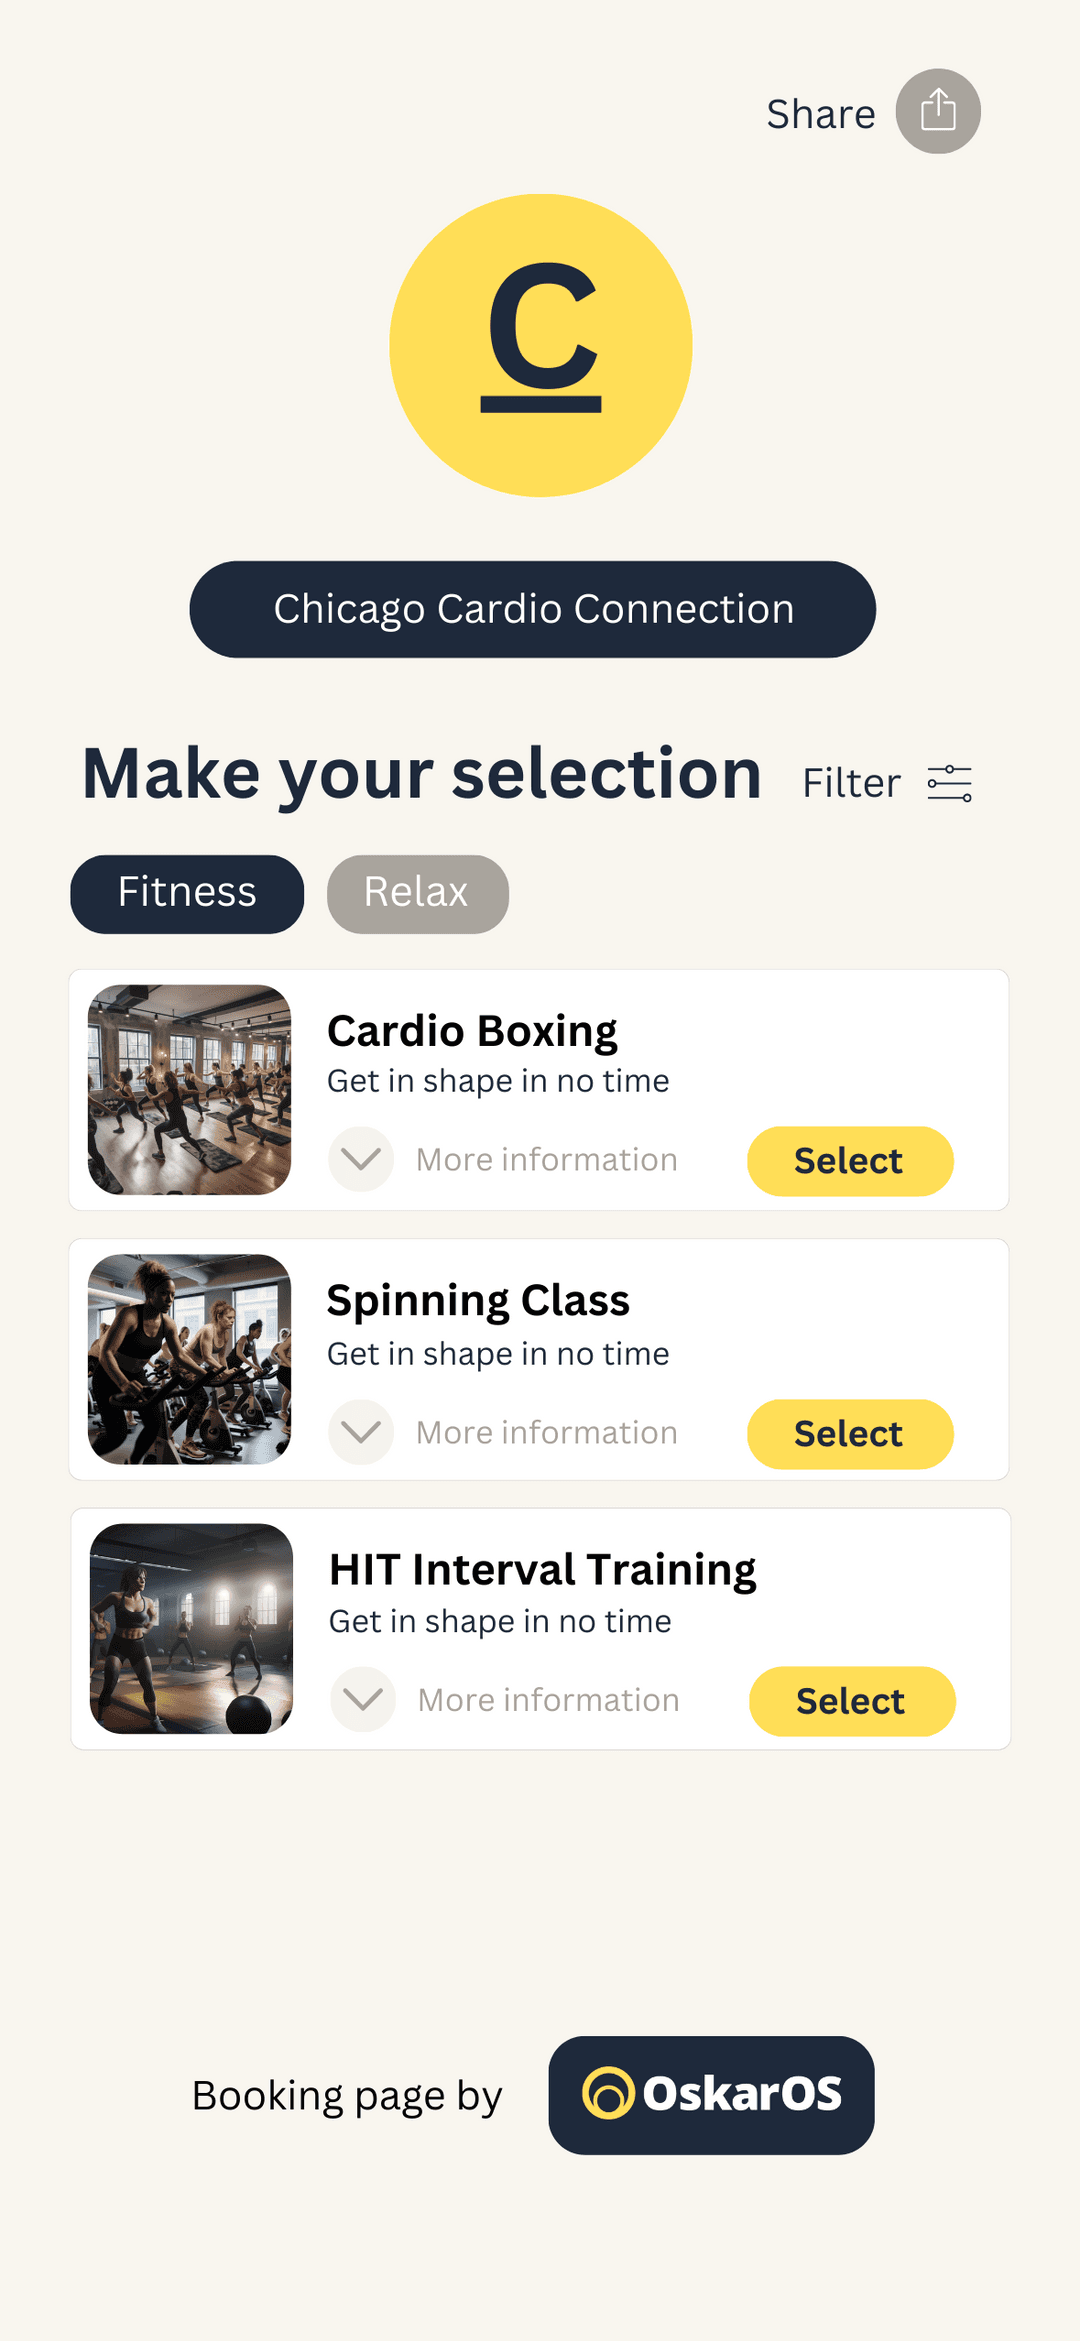 Ready to sweat? Here's your booking app!